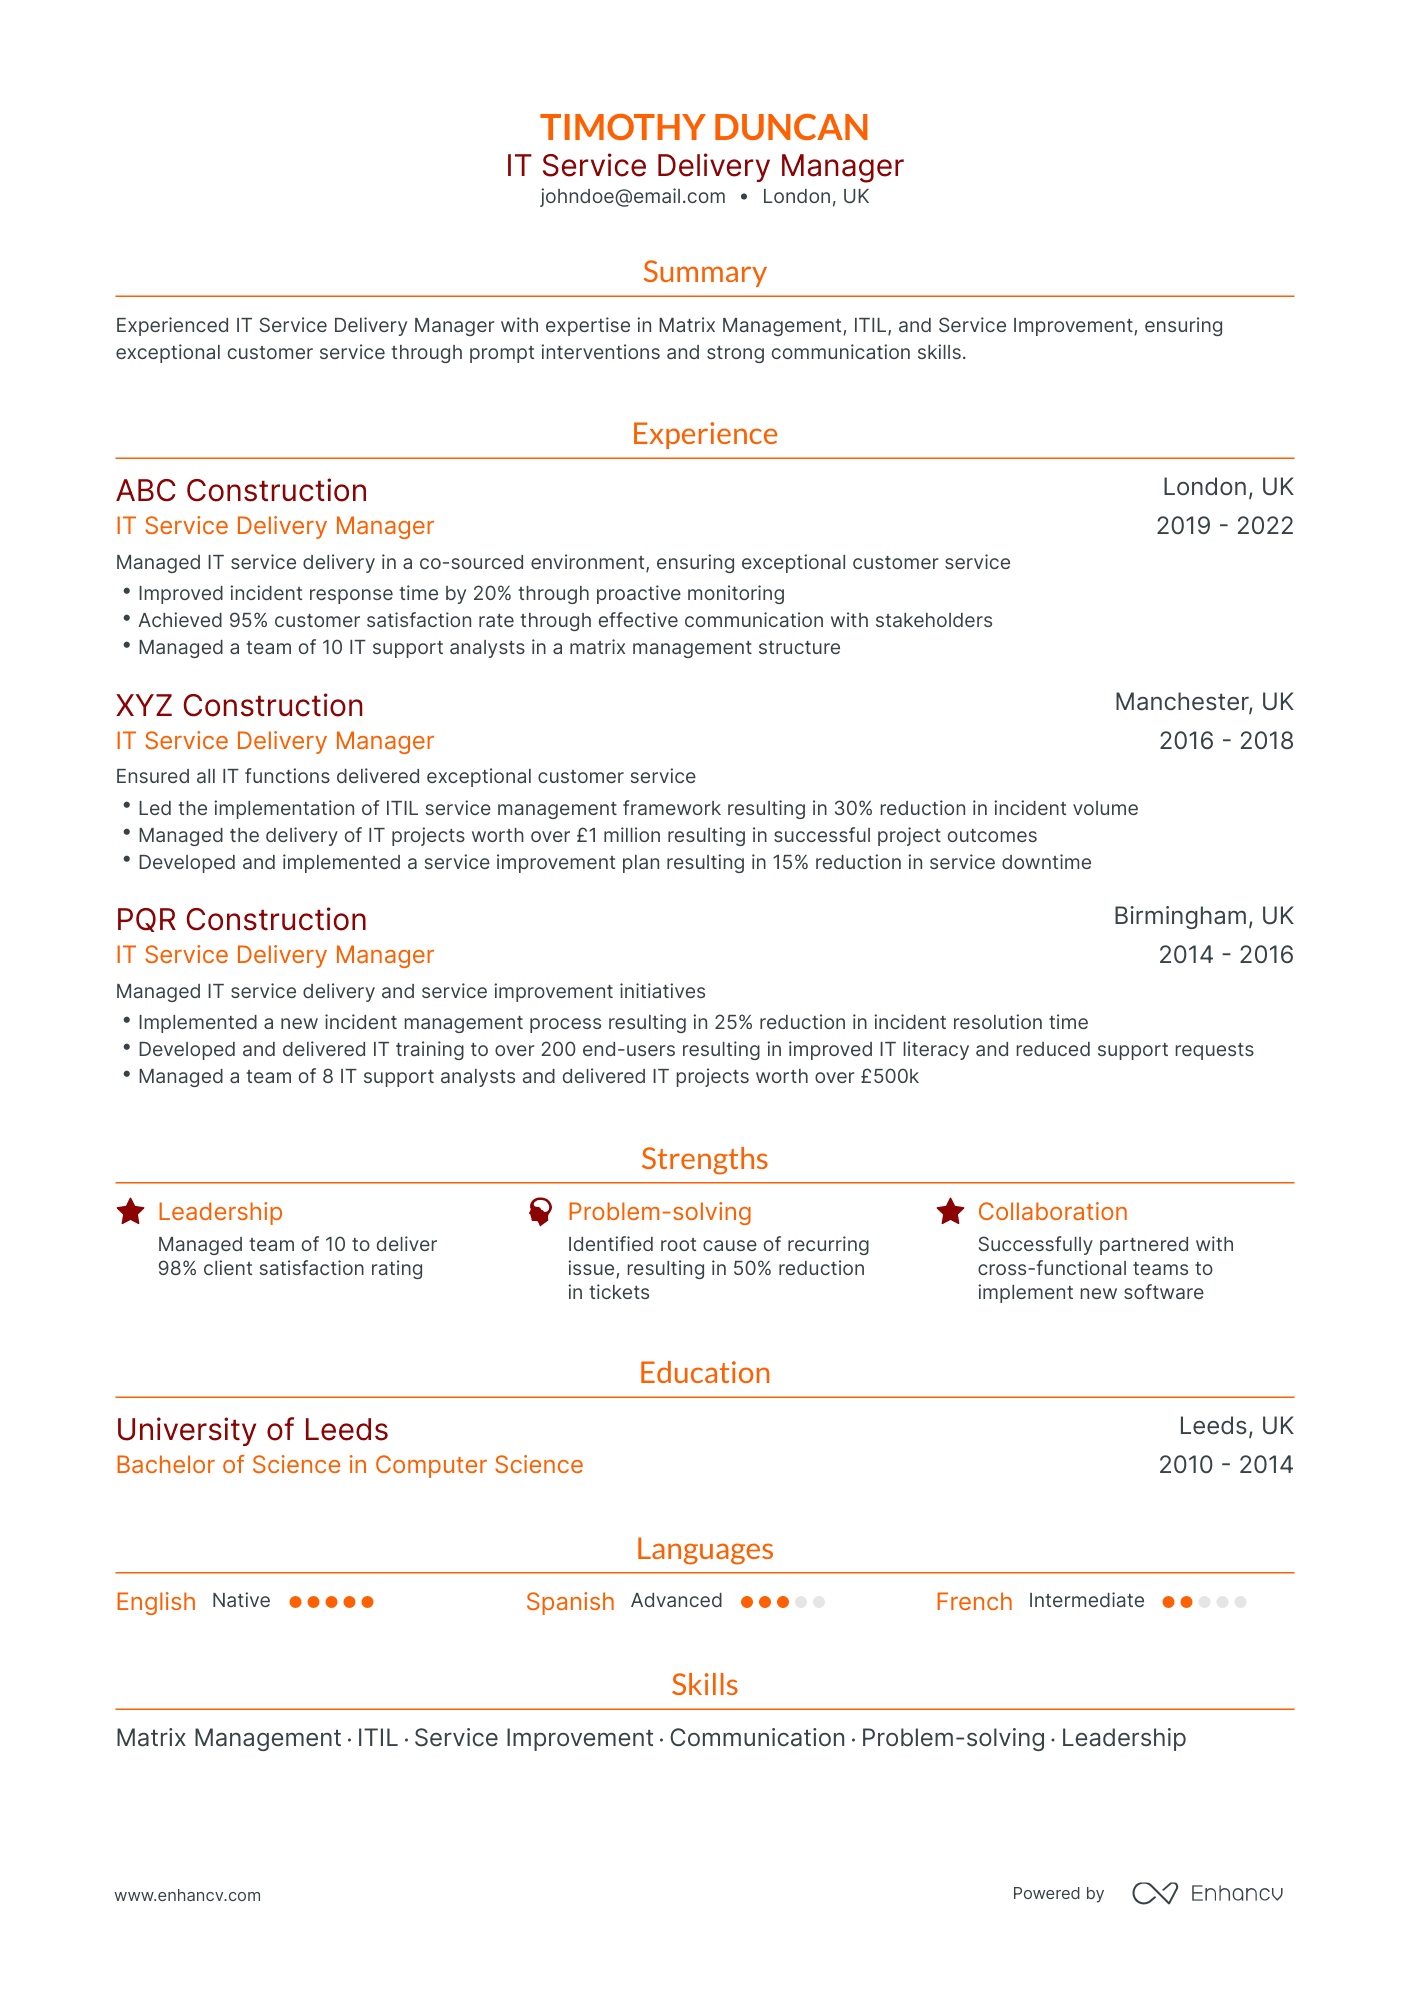 Traditional IT Service Delivery Manager Resume Template